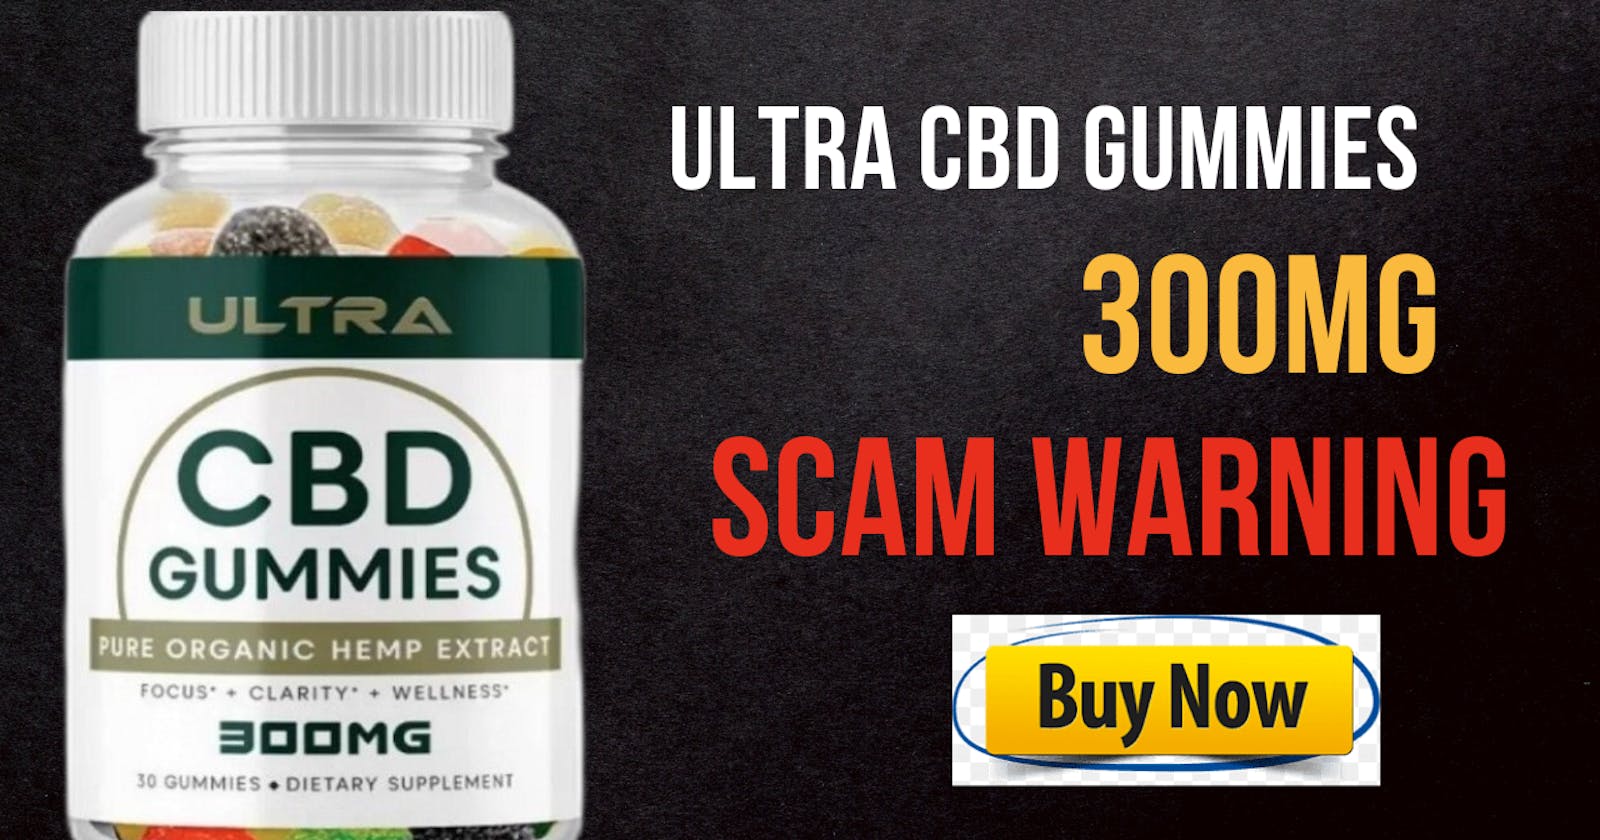 Find Relief and Relaxation with Ultra CBD Gummies in Mexico